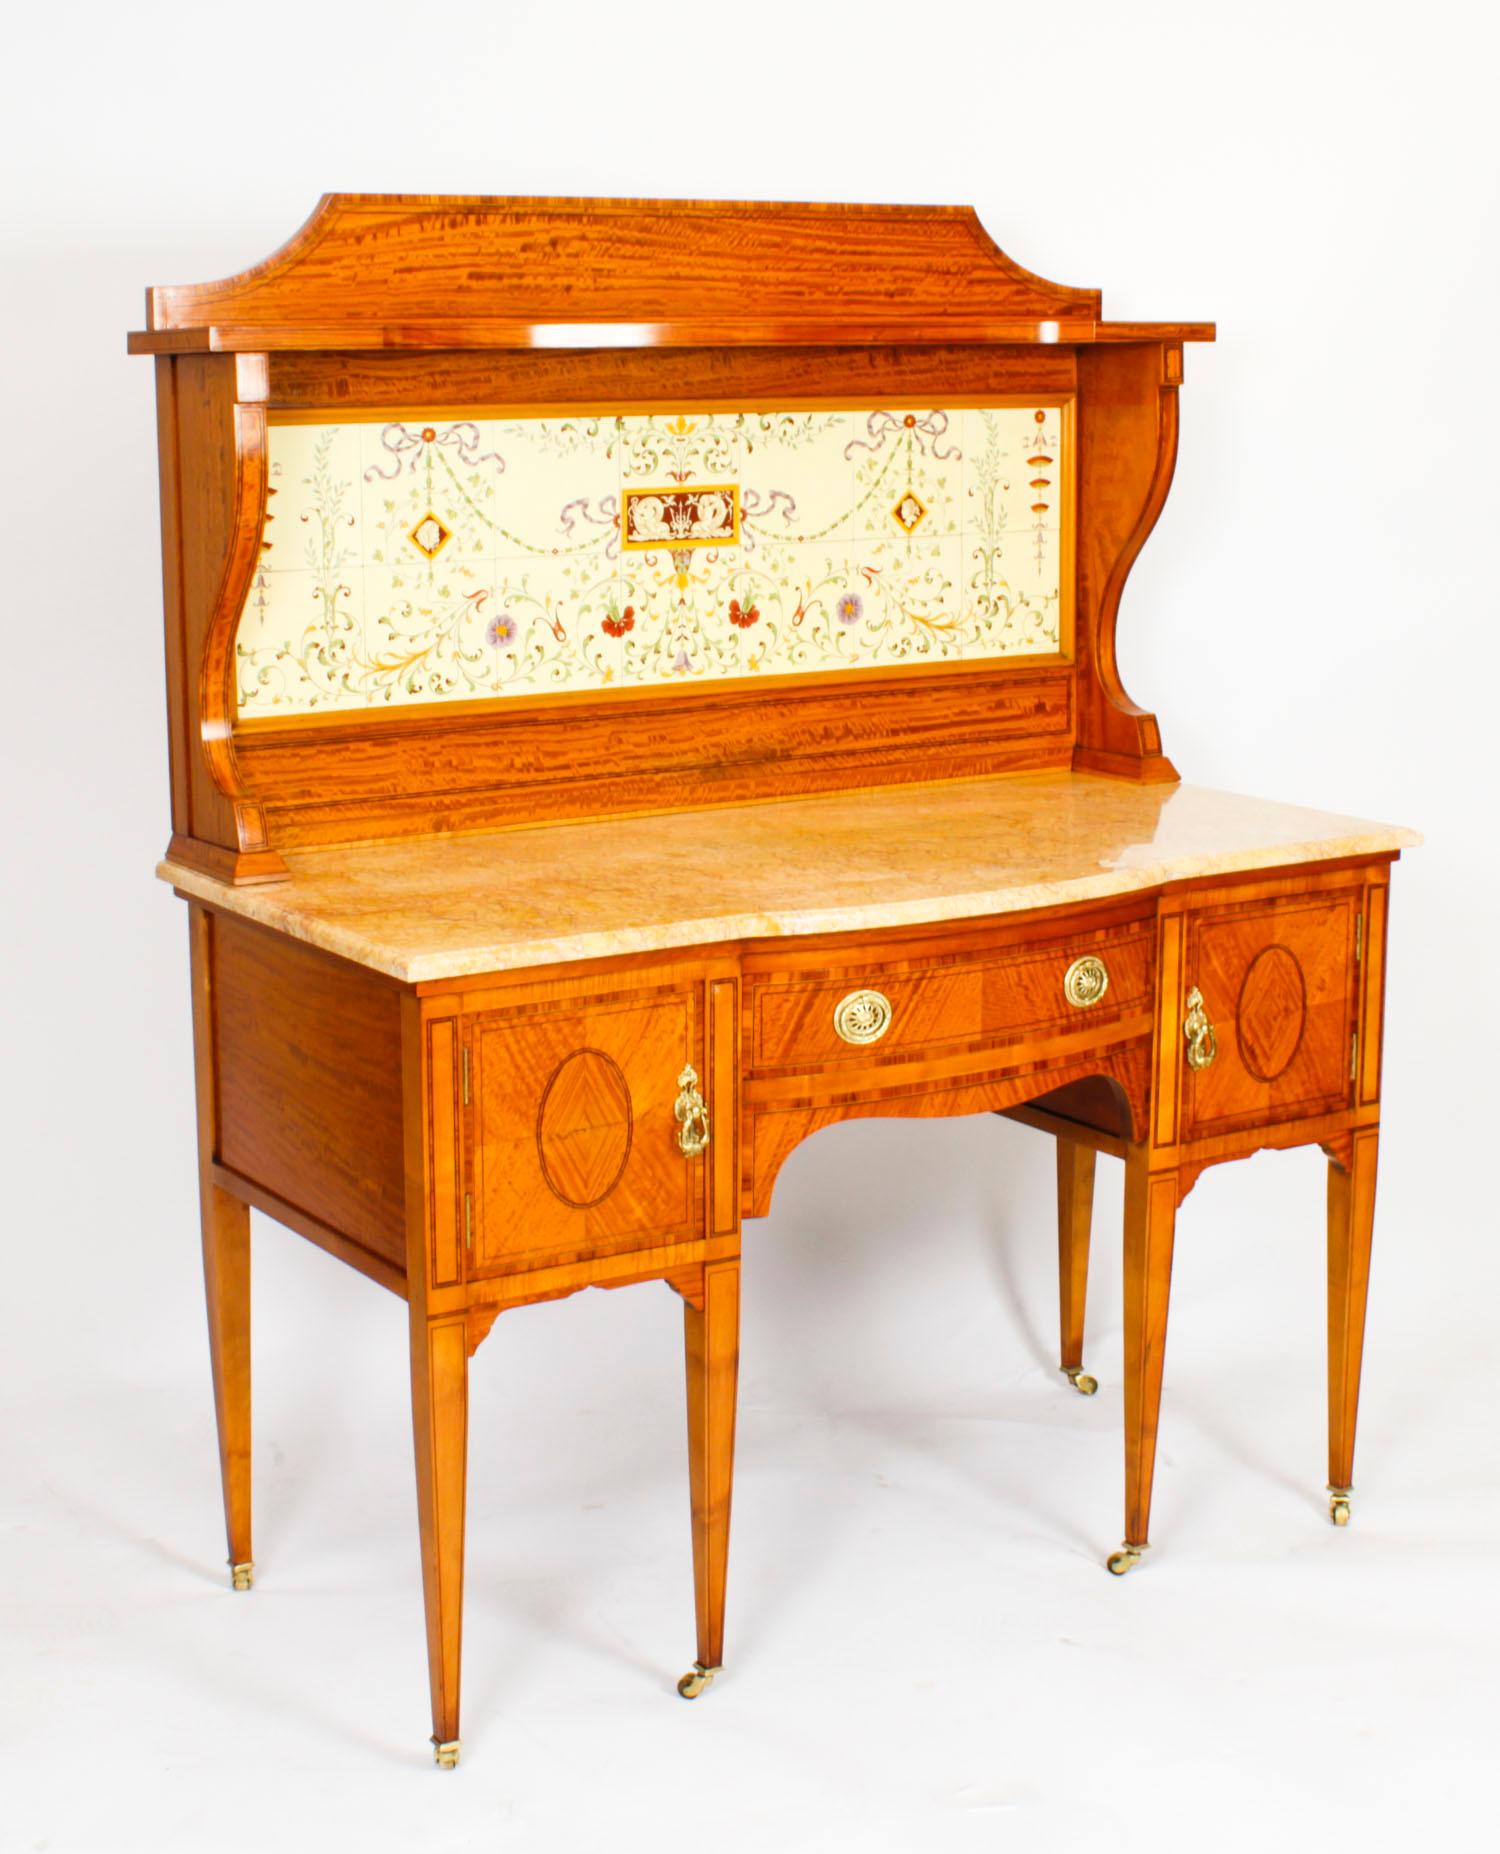 This is a fine antique satinwood marble top dressing table by the world renownd retailer Maple & Co, Circa 1880 in date.
 
The stunning satinwood wash stand has boxwood and ebonised stringing inlay and crossbanding through-out. It features a